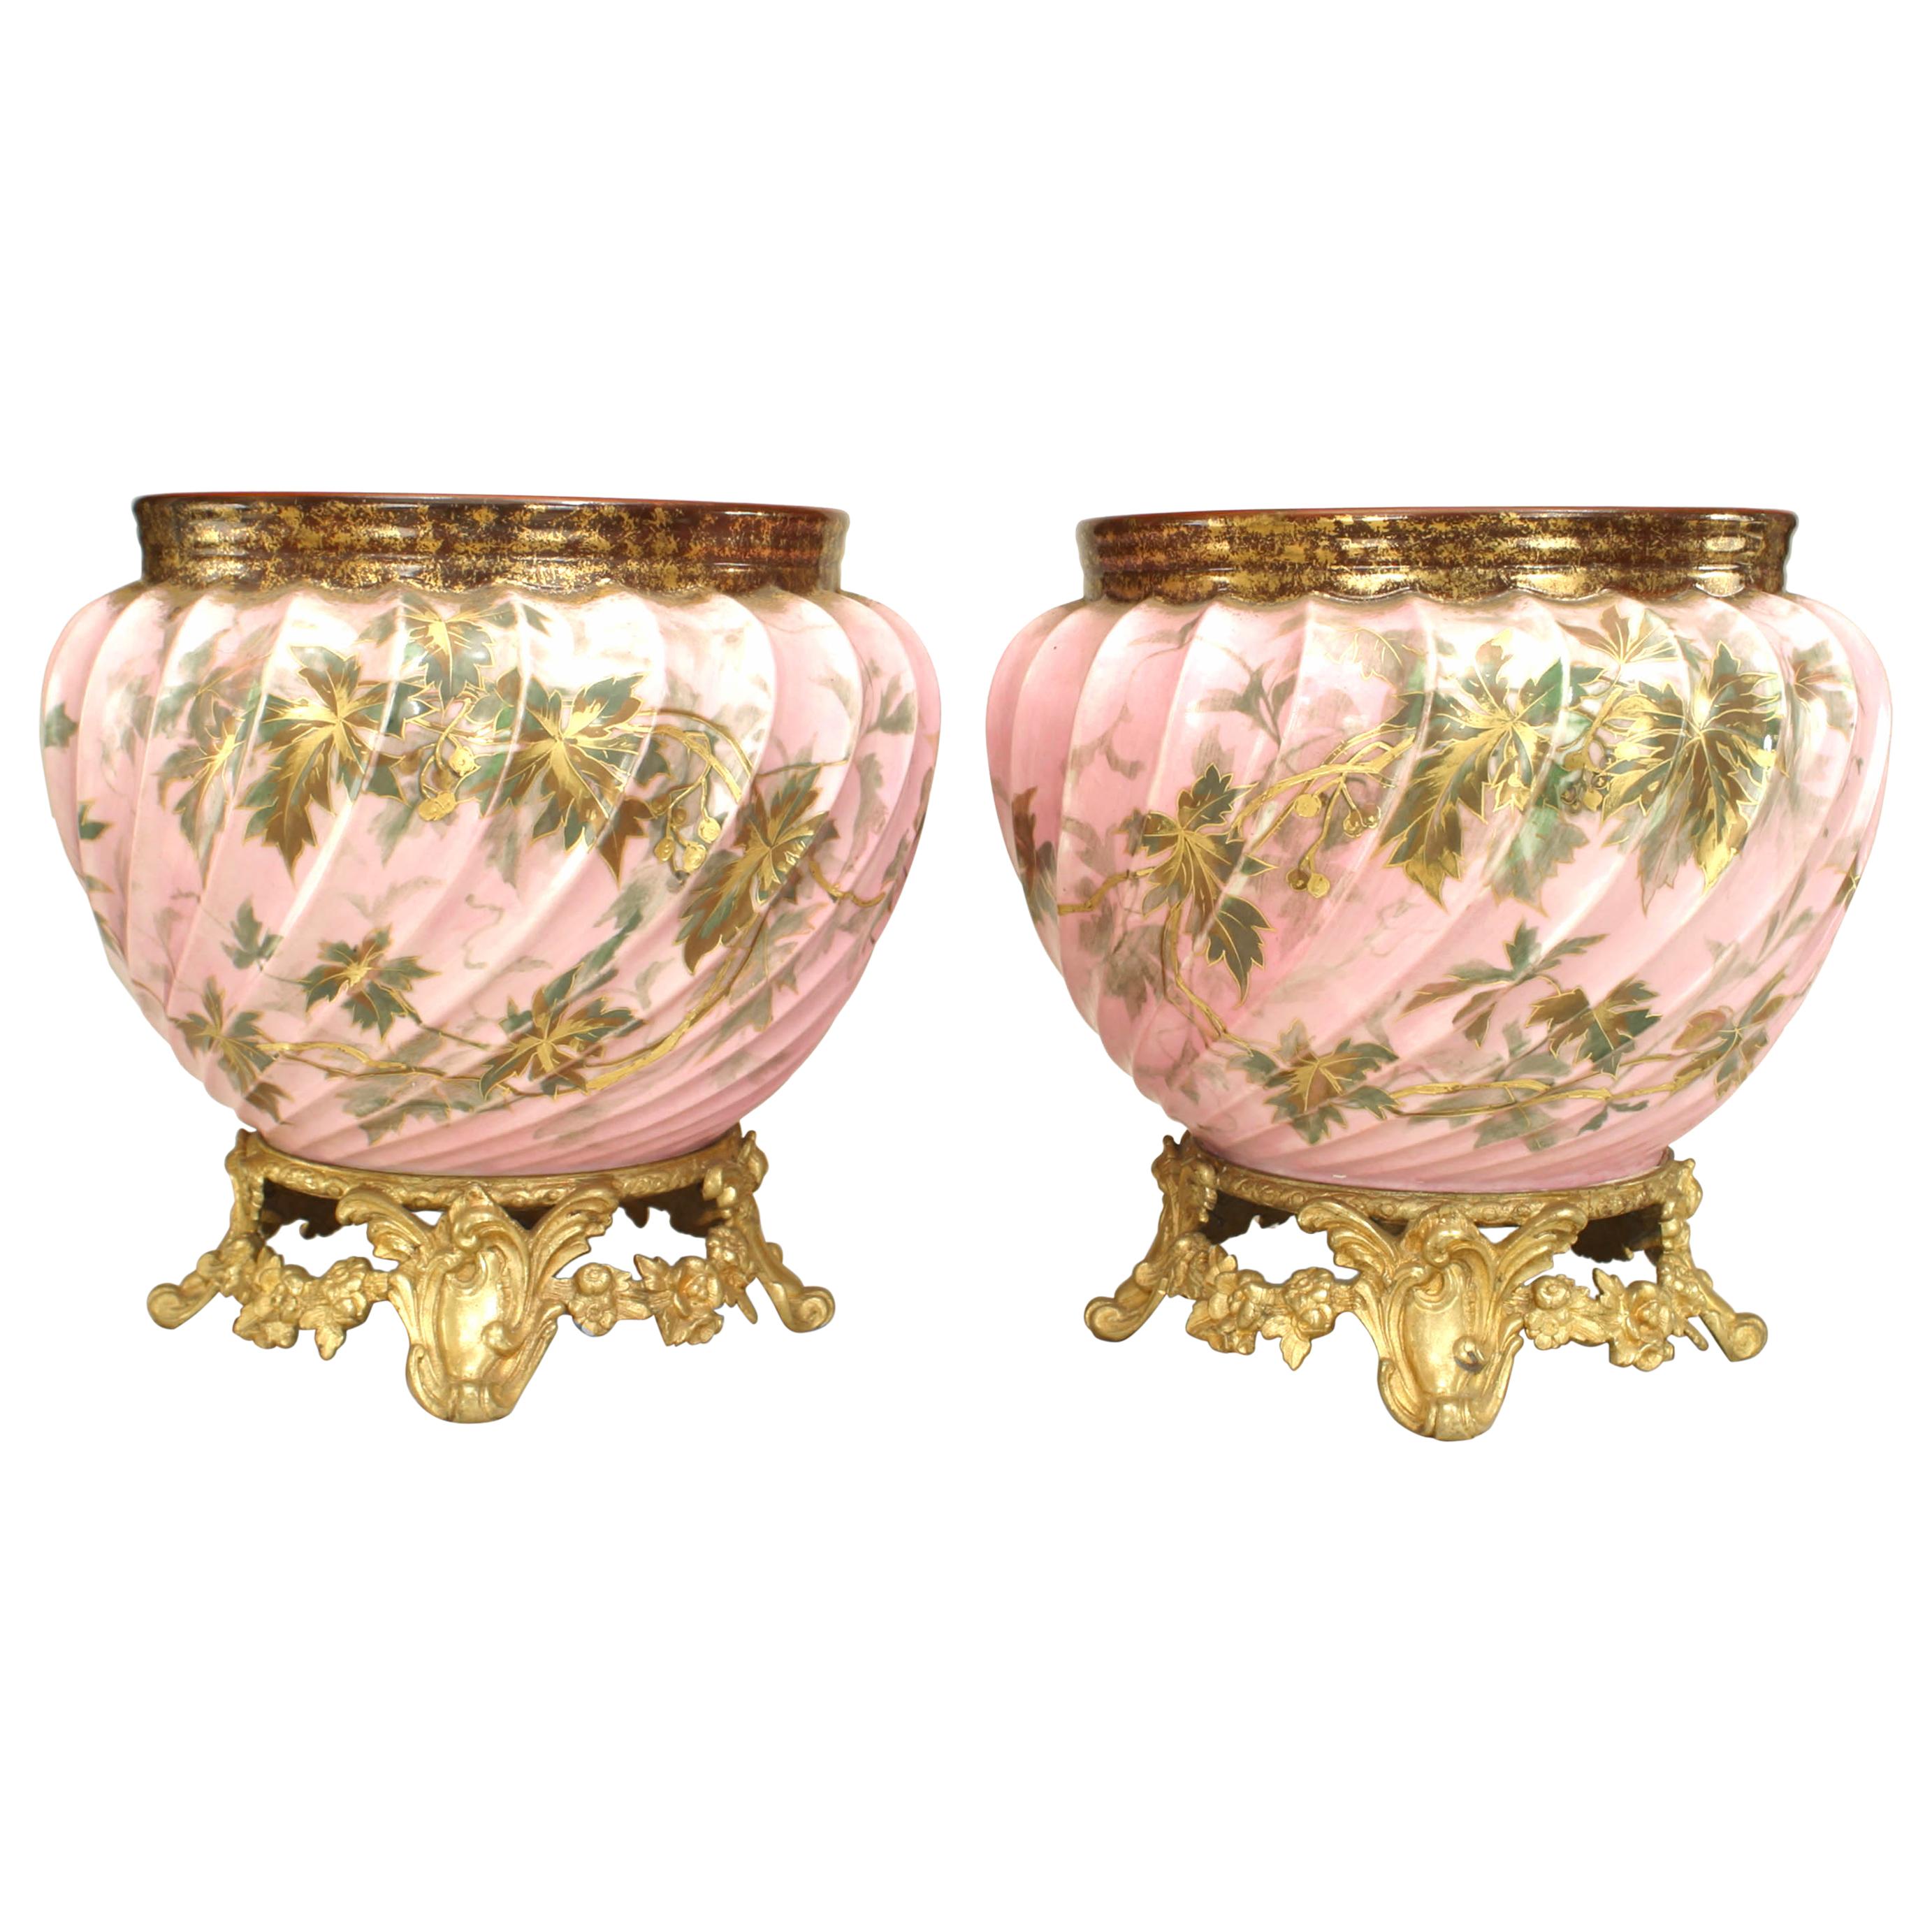 Pair of French Victorian Floral Porcelain Pots